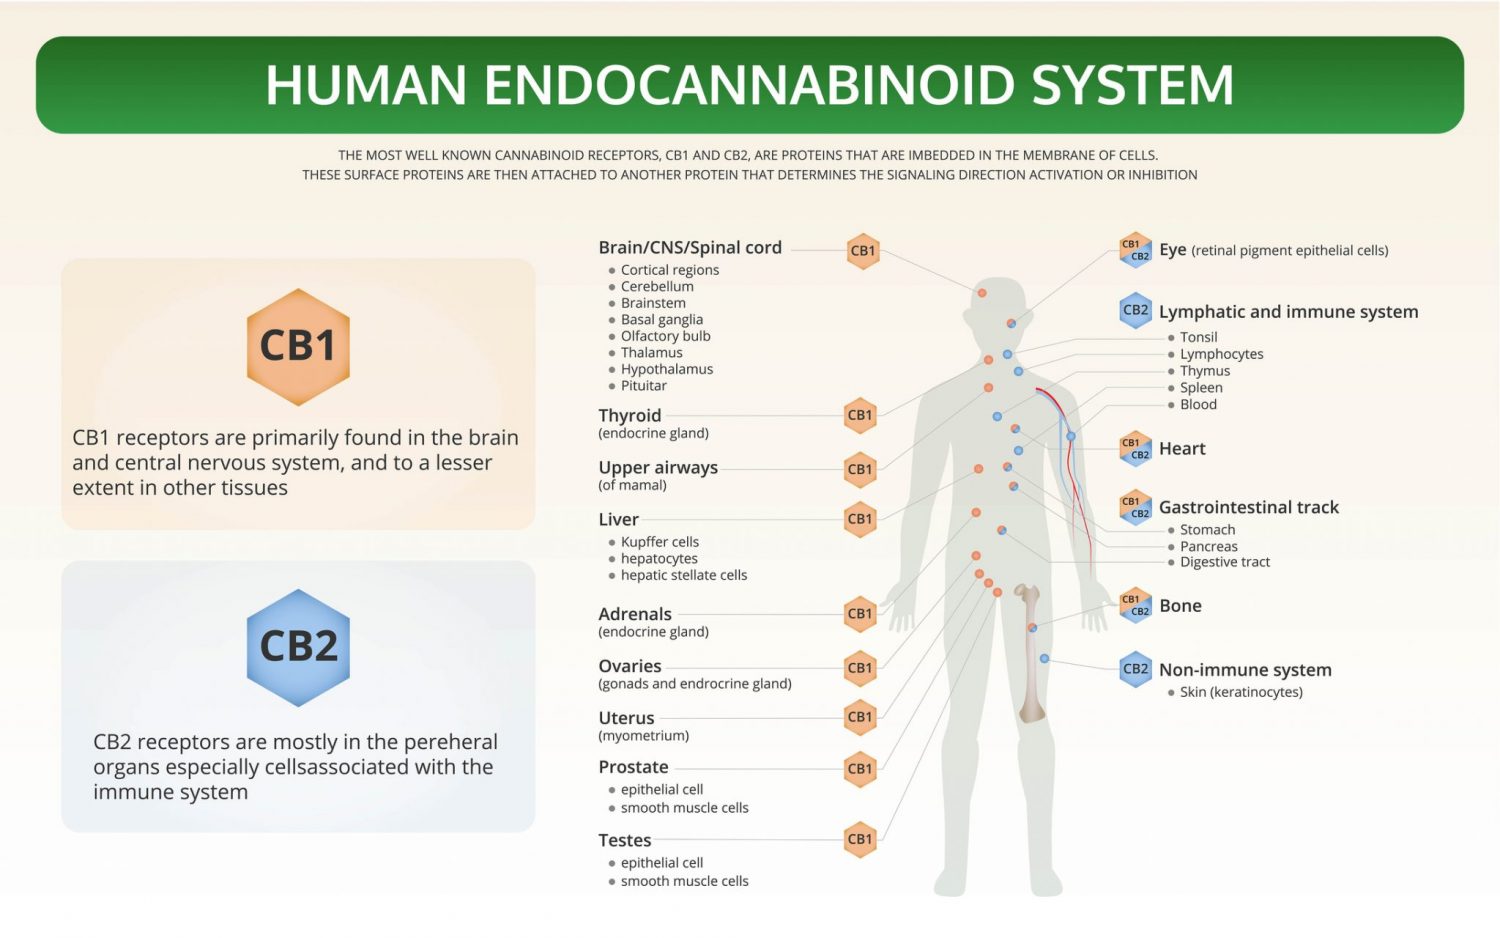 5 Things To Know About The Endocannabinoid System